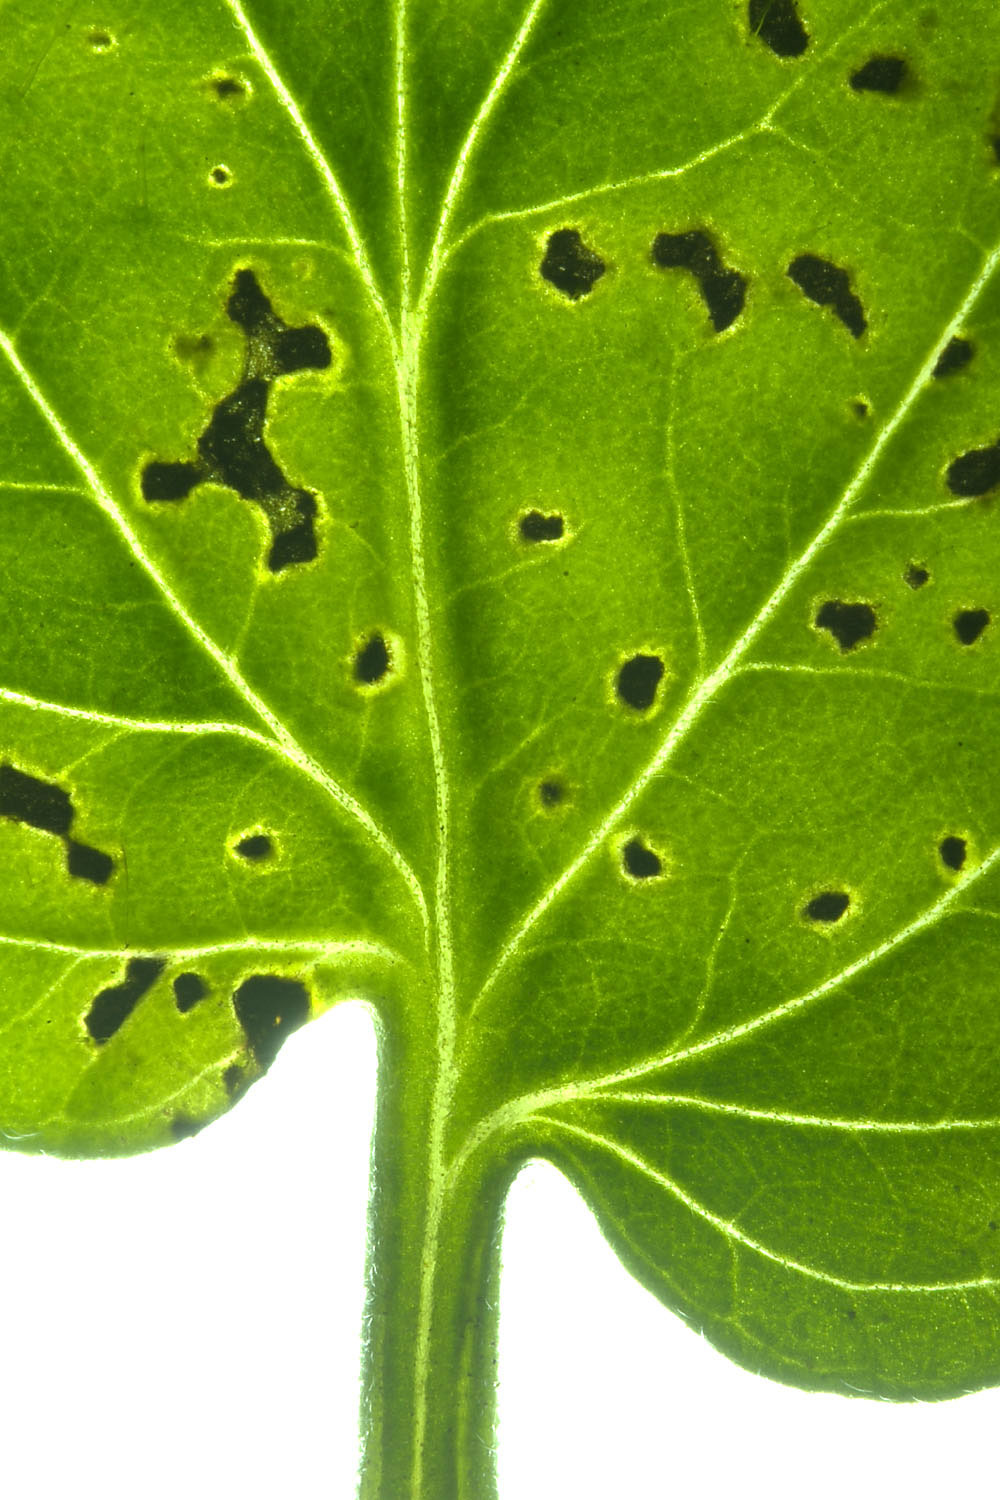 close-up of an infected tomato plant leaf